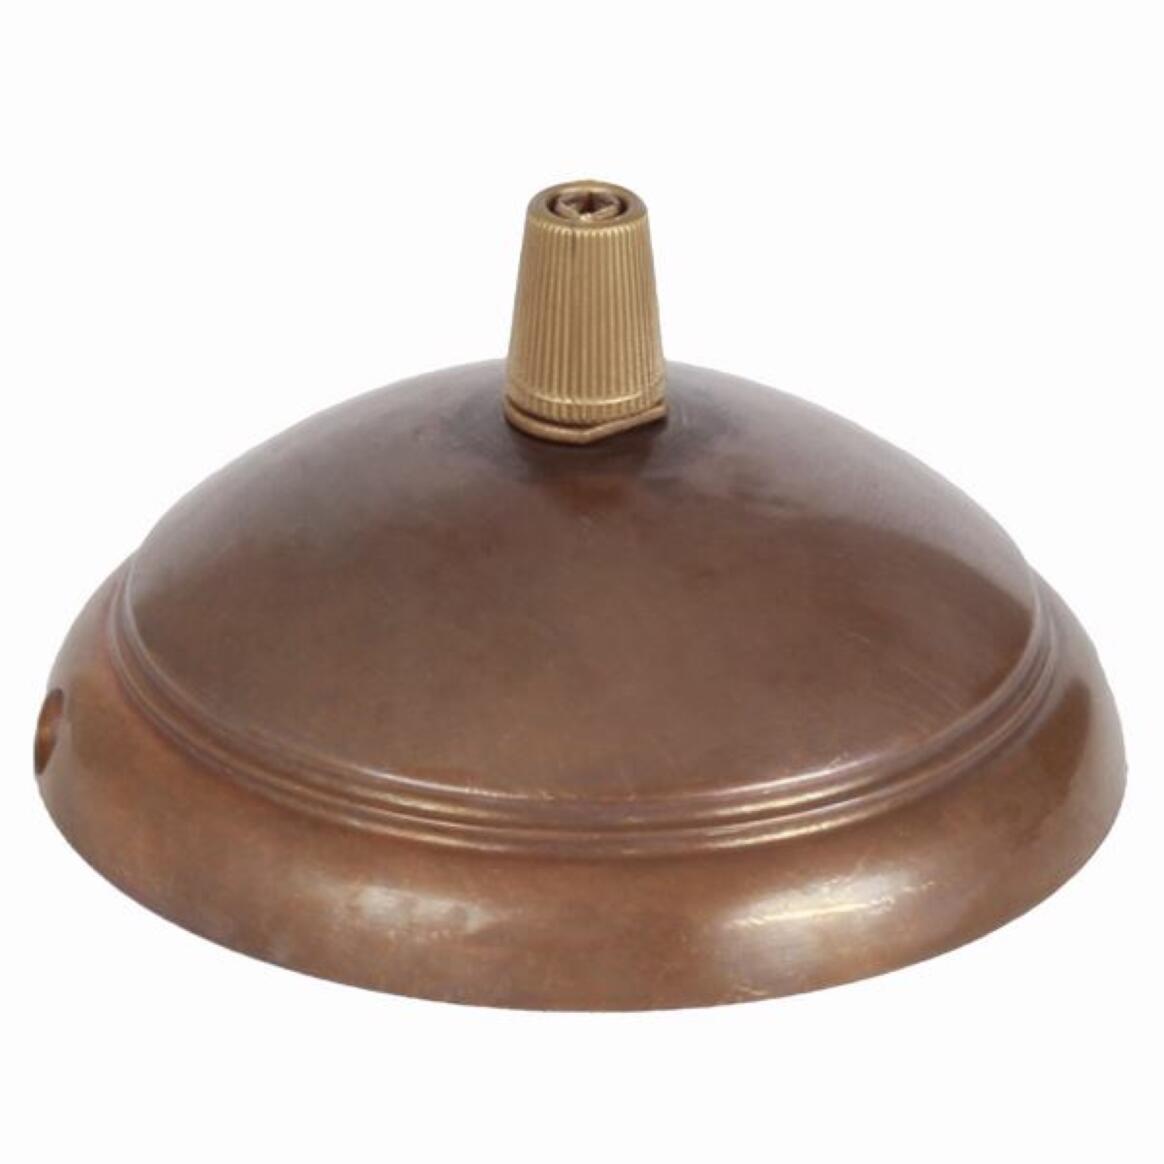 Brass ceiling rose light fitting, dome with cord grip main product image